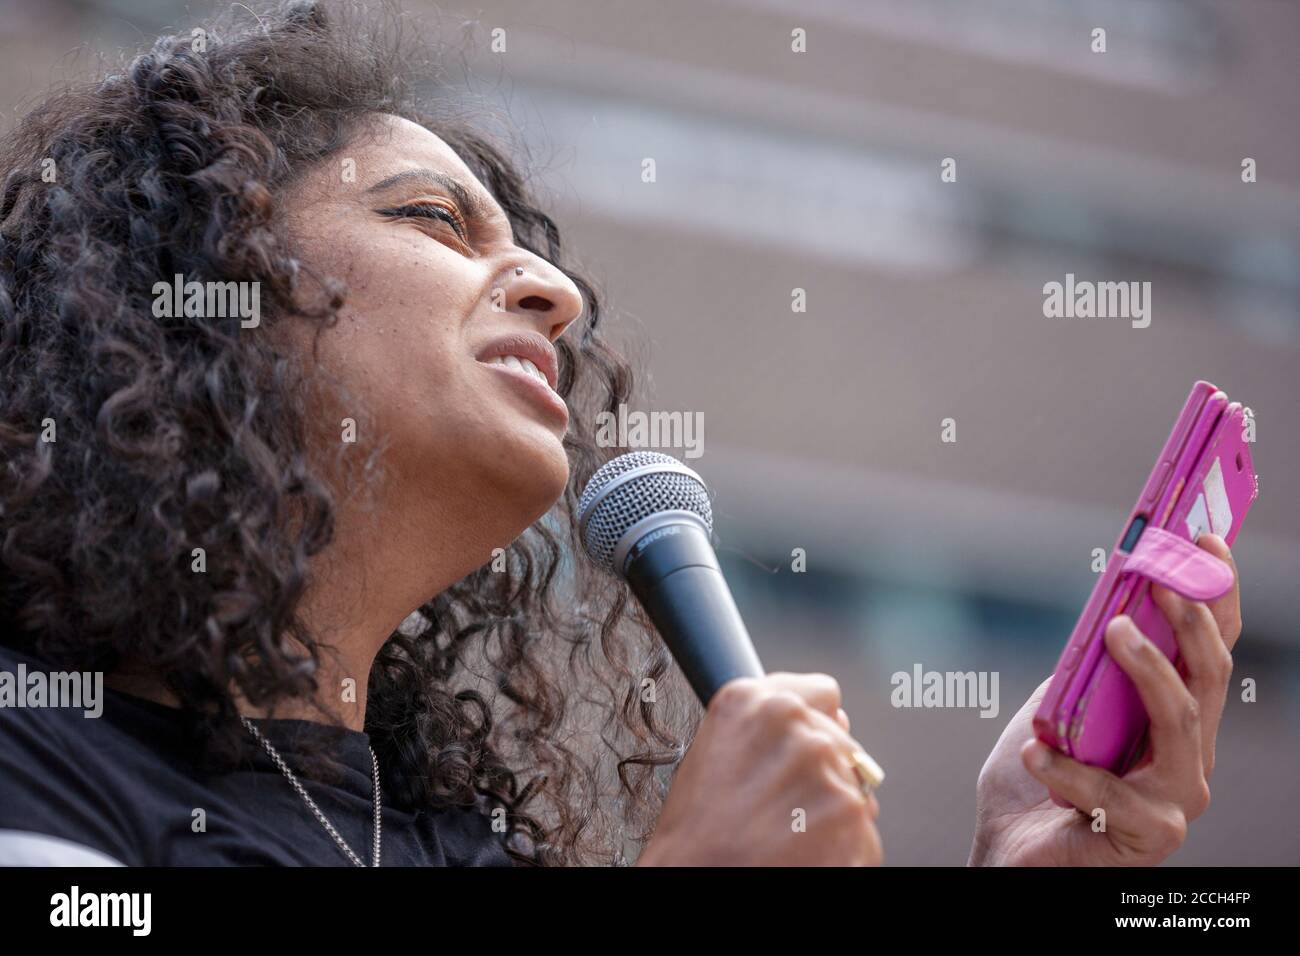 London, UK. 22nd August 2020. Author, Sheena Patel, gives a speech in front of Tate modern art gallery, in protest of the institution’s decision to cut 313 jobs from its commercial arm, Tate Enterprises. Credit: Neil Atkinson/Alamy Live News Stock Photo